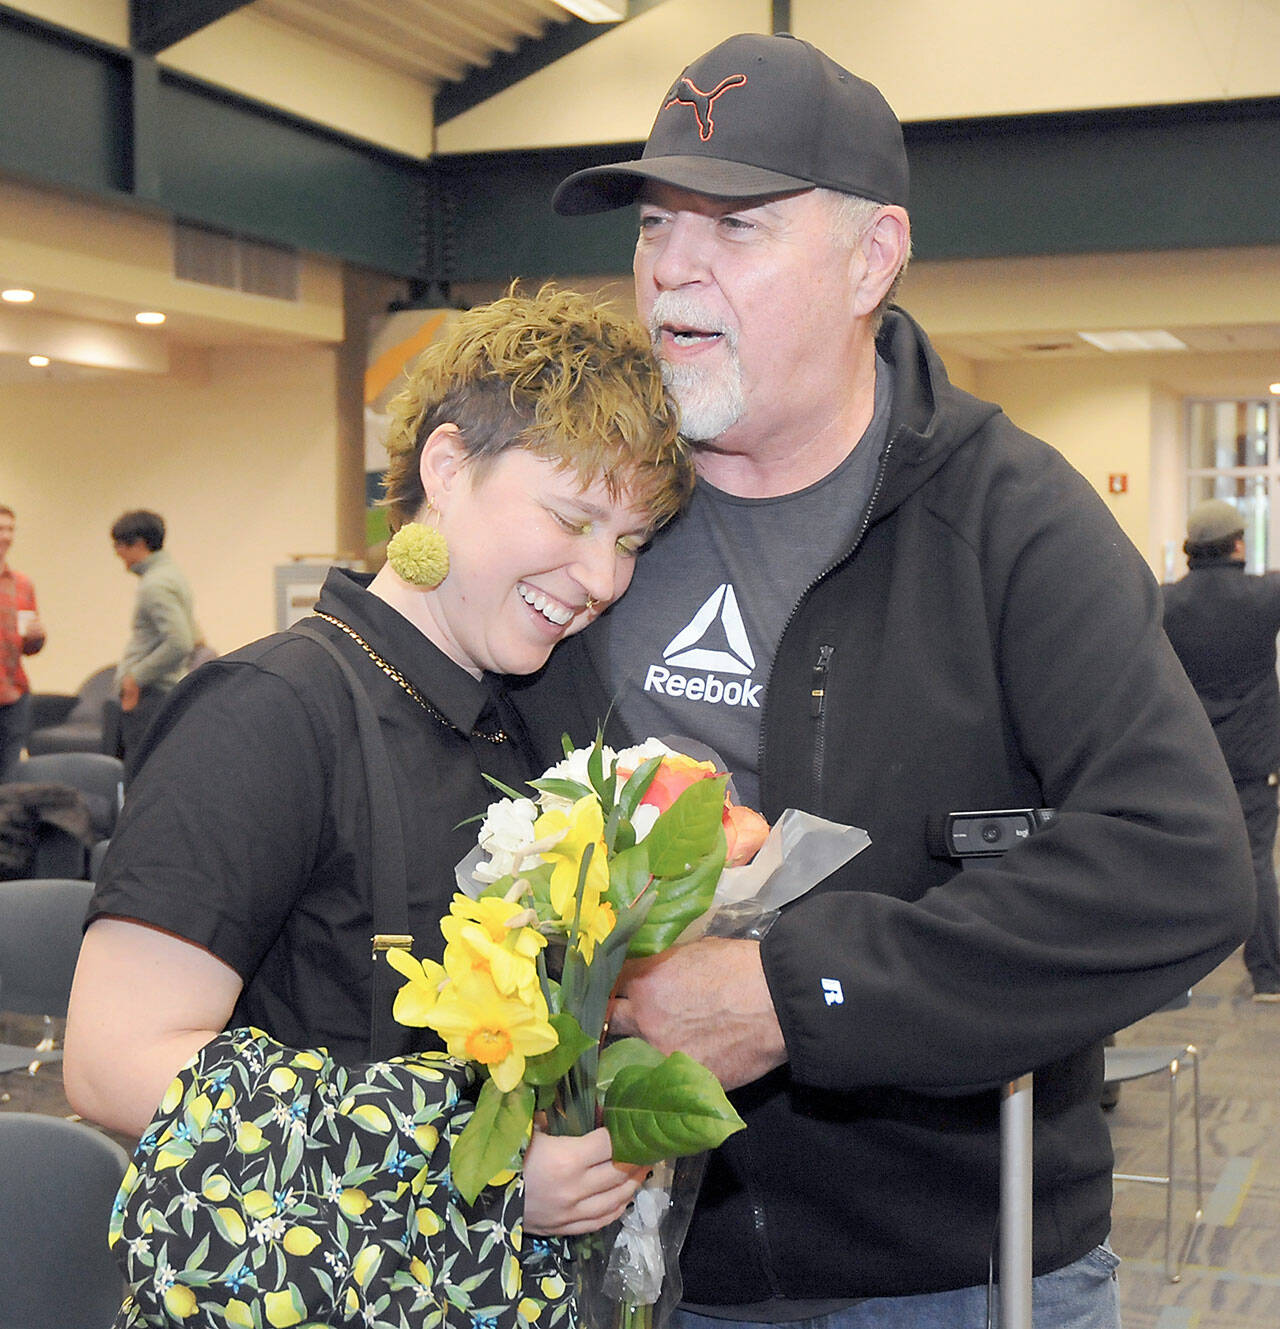 Jaiden Dokken, Clallam County’s first poet laureate, receives a hug and flowers from their father Mark Dokken of Port Angeles after Jaiden was inaugurated to their two-year post on Tuesday at the Port Angeles Public Library. (Keith Thorpe/Peninsula Daily News)